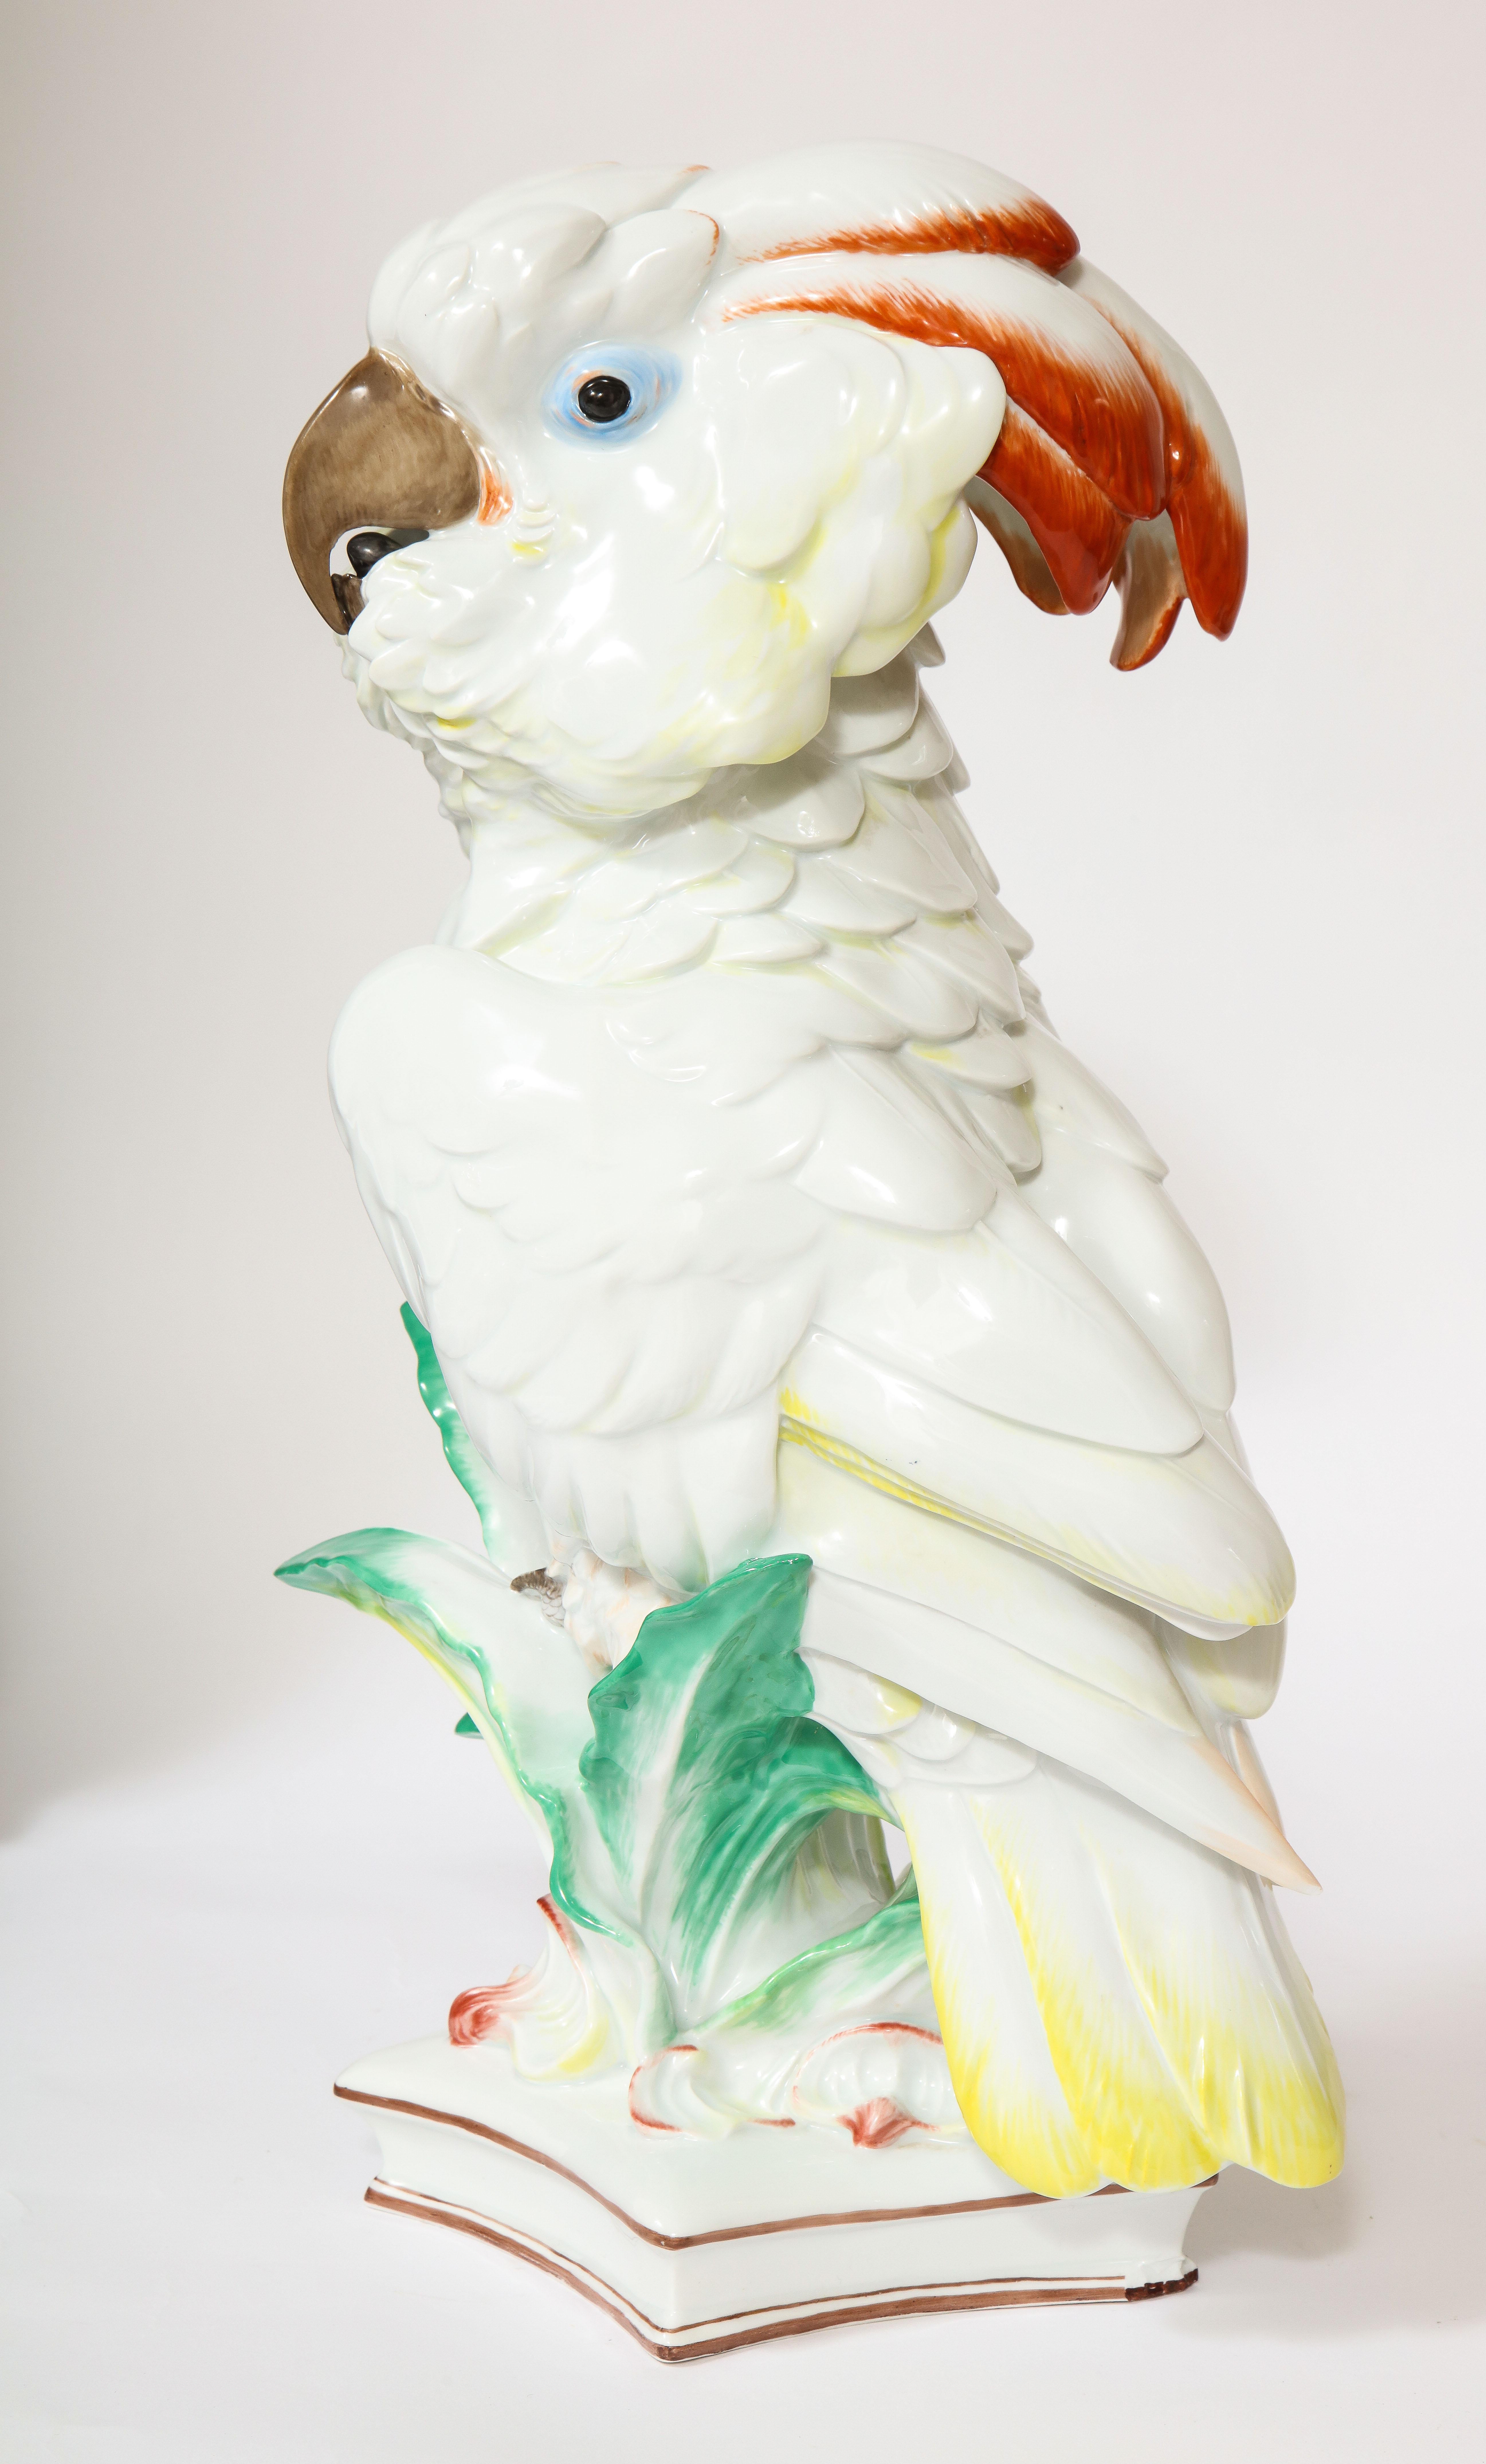 Large Antique Meissen Porcelain Model of a Seated Cockatoo, Pfiffer Period 1